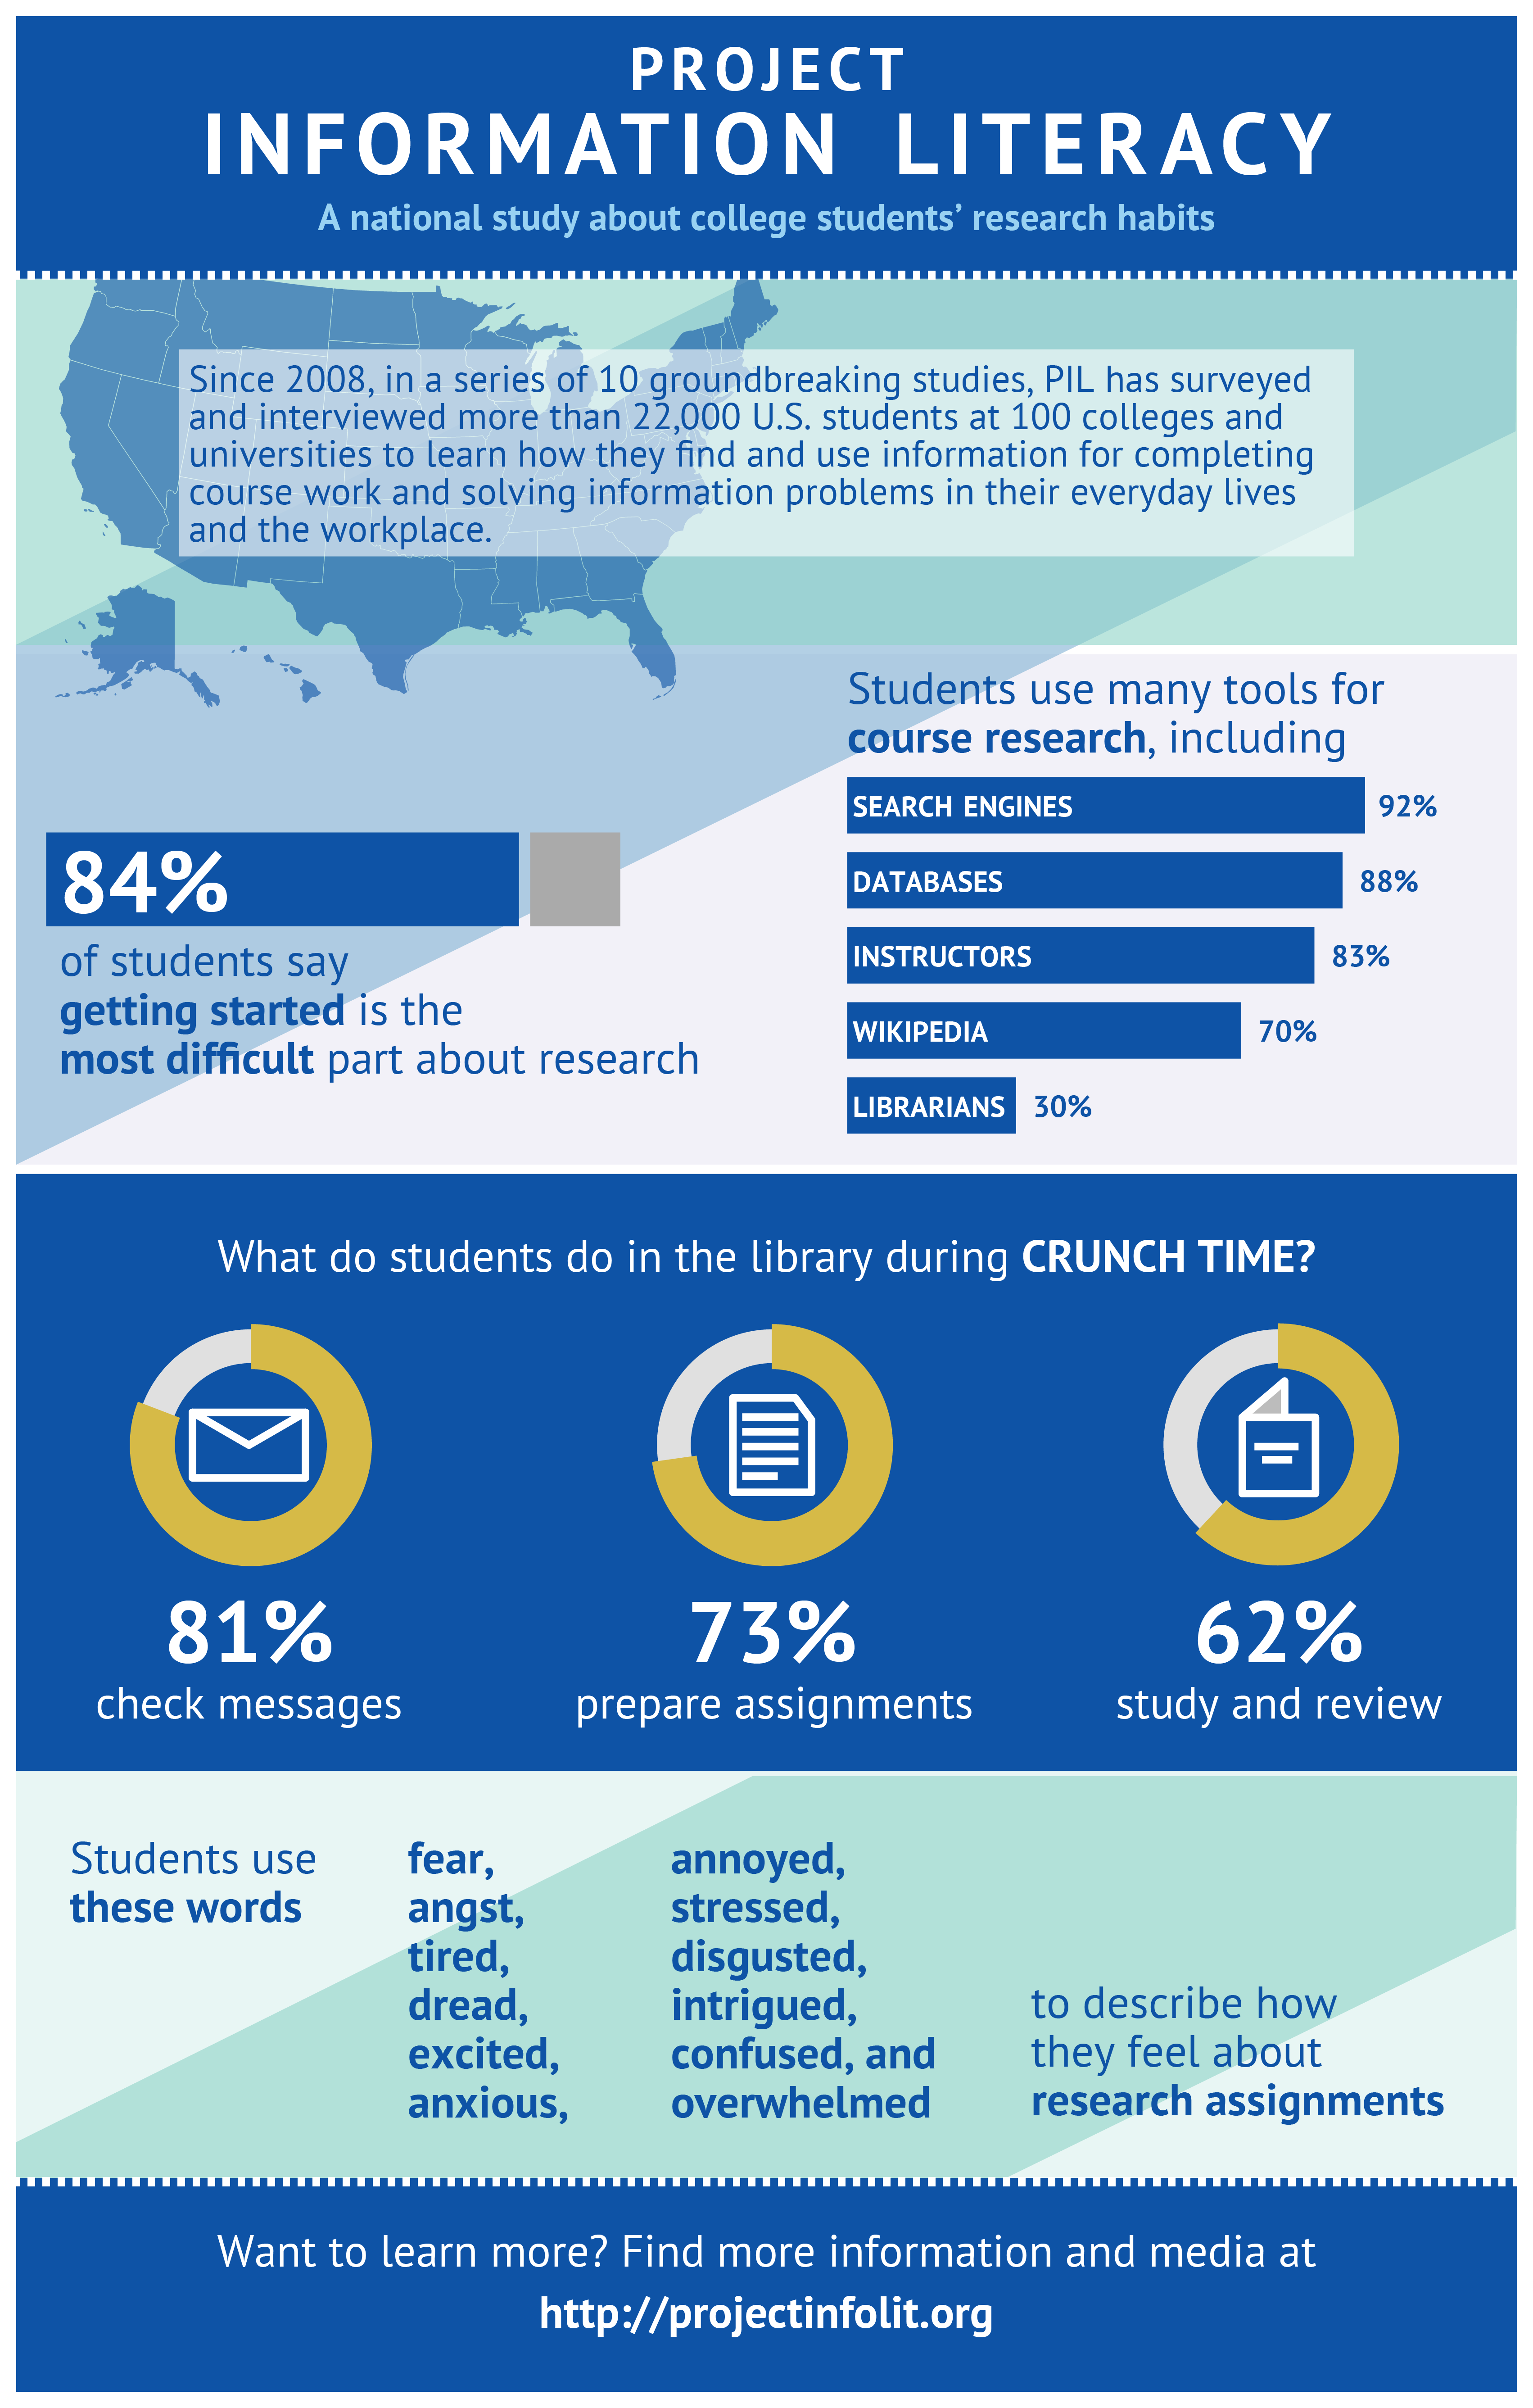 About Project Information Literacy